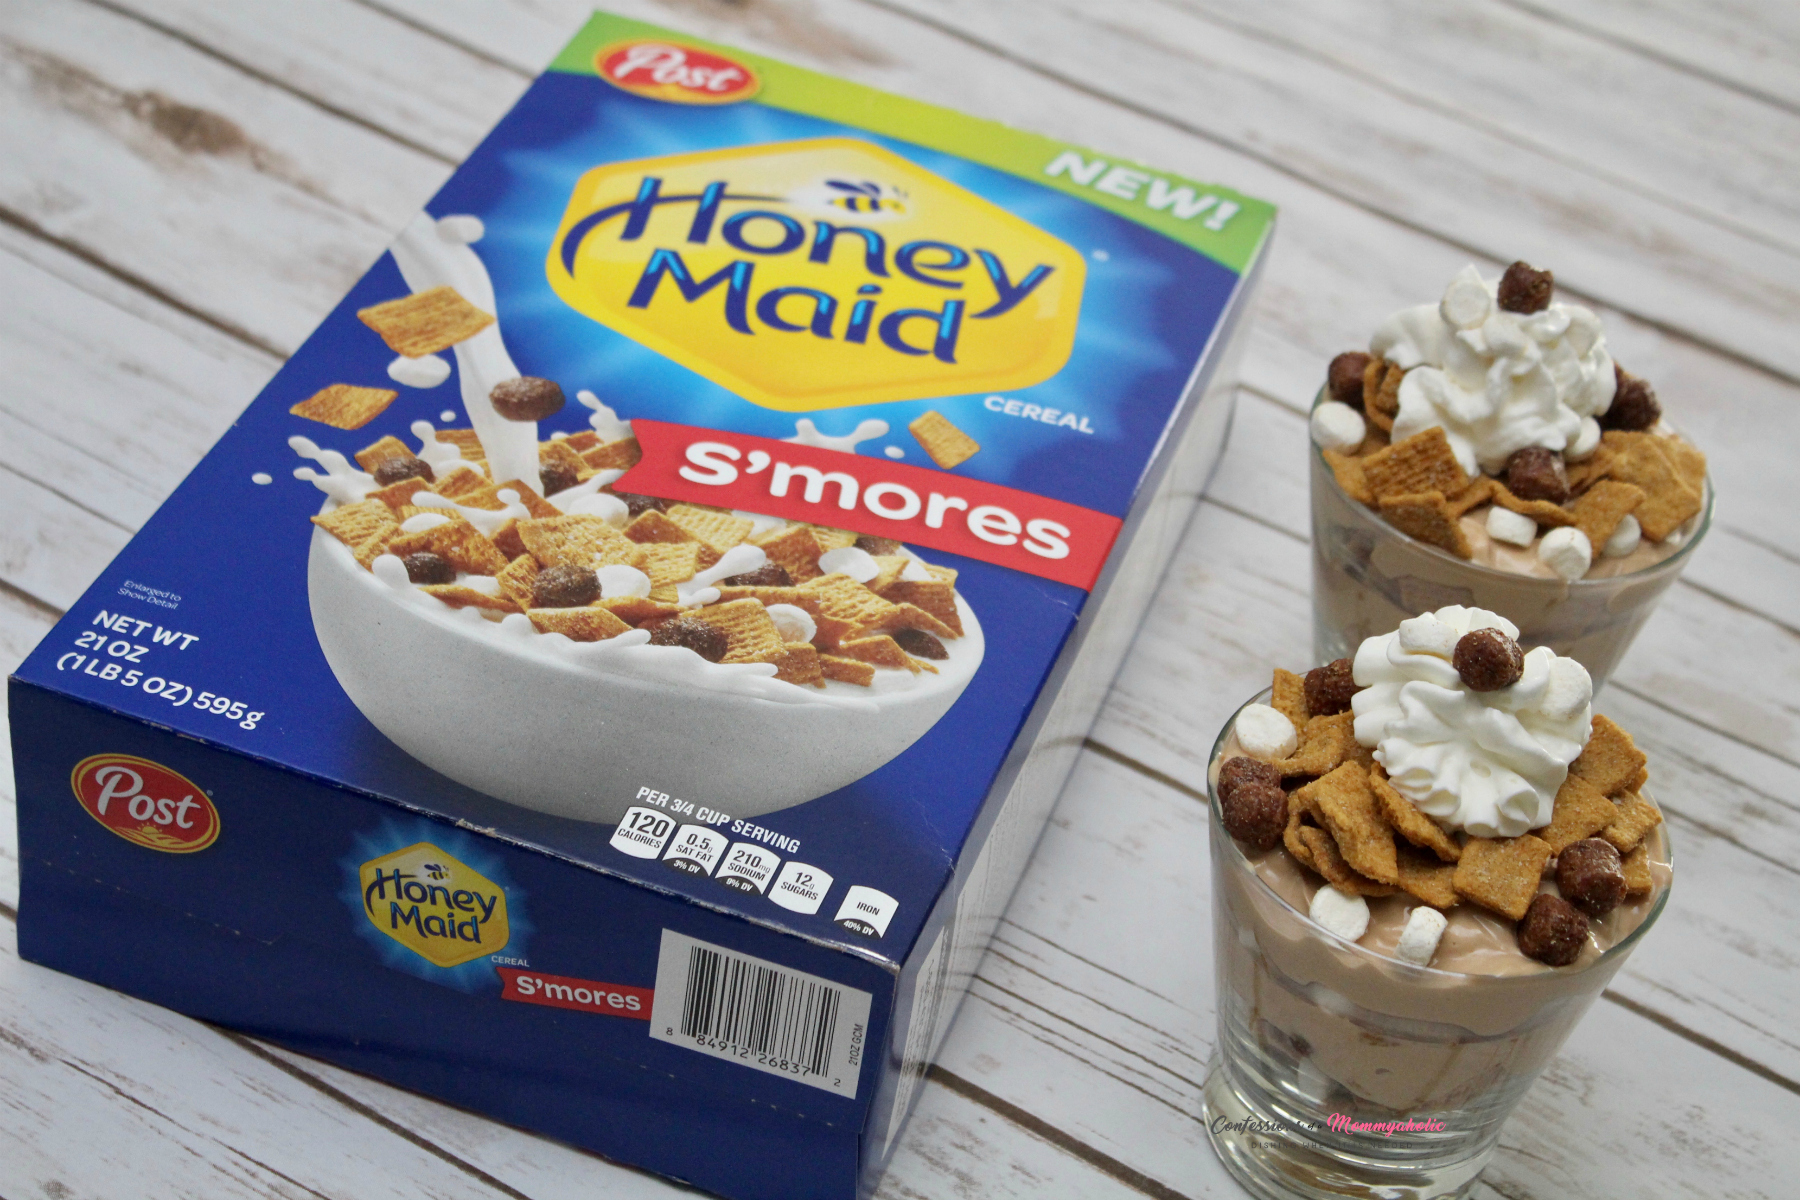 Honey Maid S'mores and Finished Parfait Cups